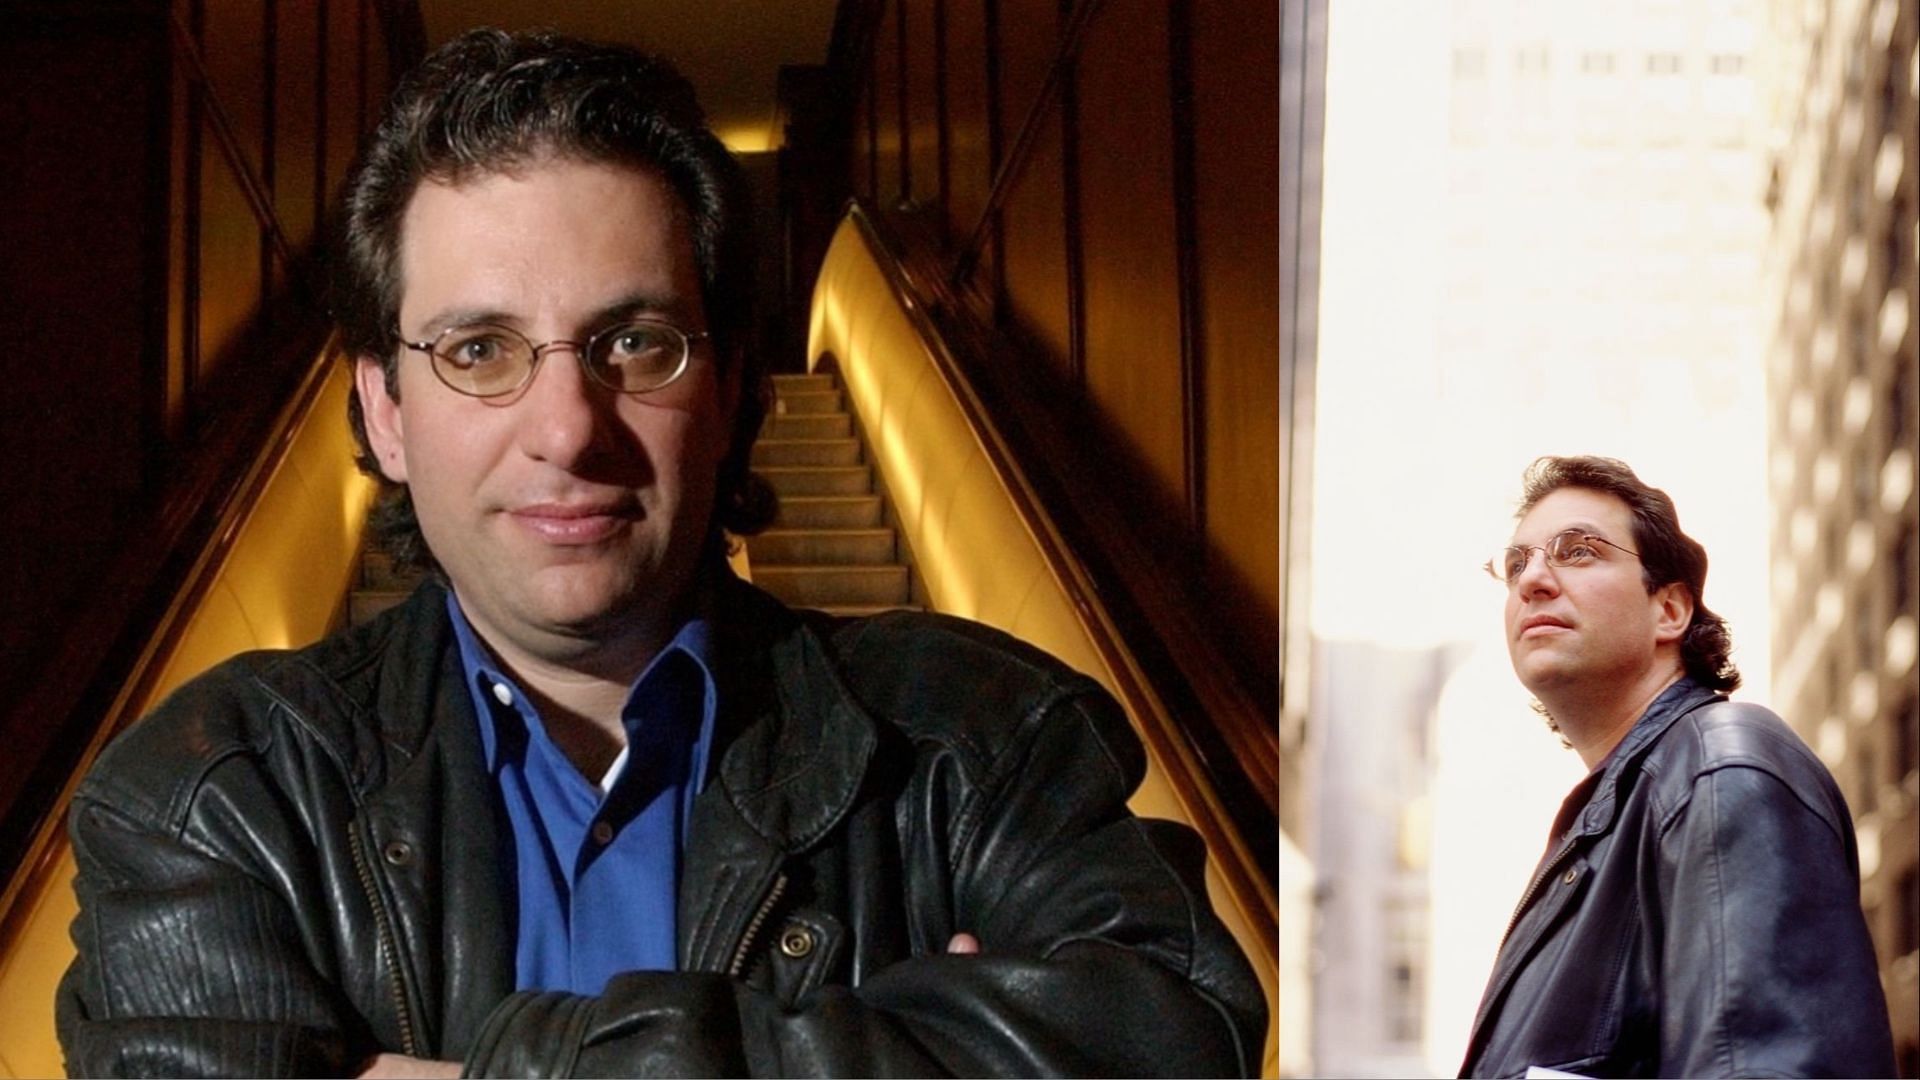 Former Hacker Kevin Mitnick has reportedly died at the age of 59. (Images via Craig F. Walker &amp; Juergen Frank/ Getty Images)